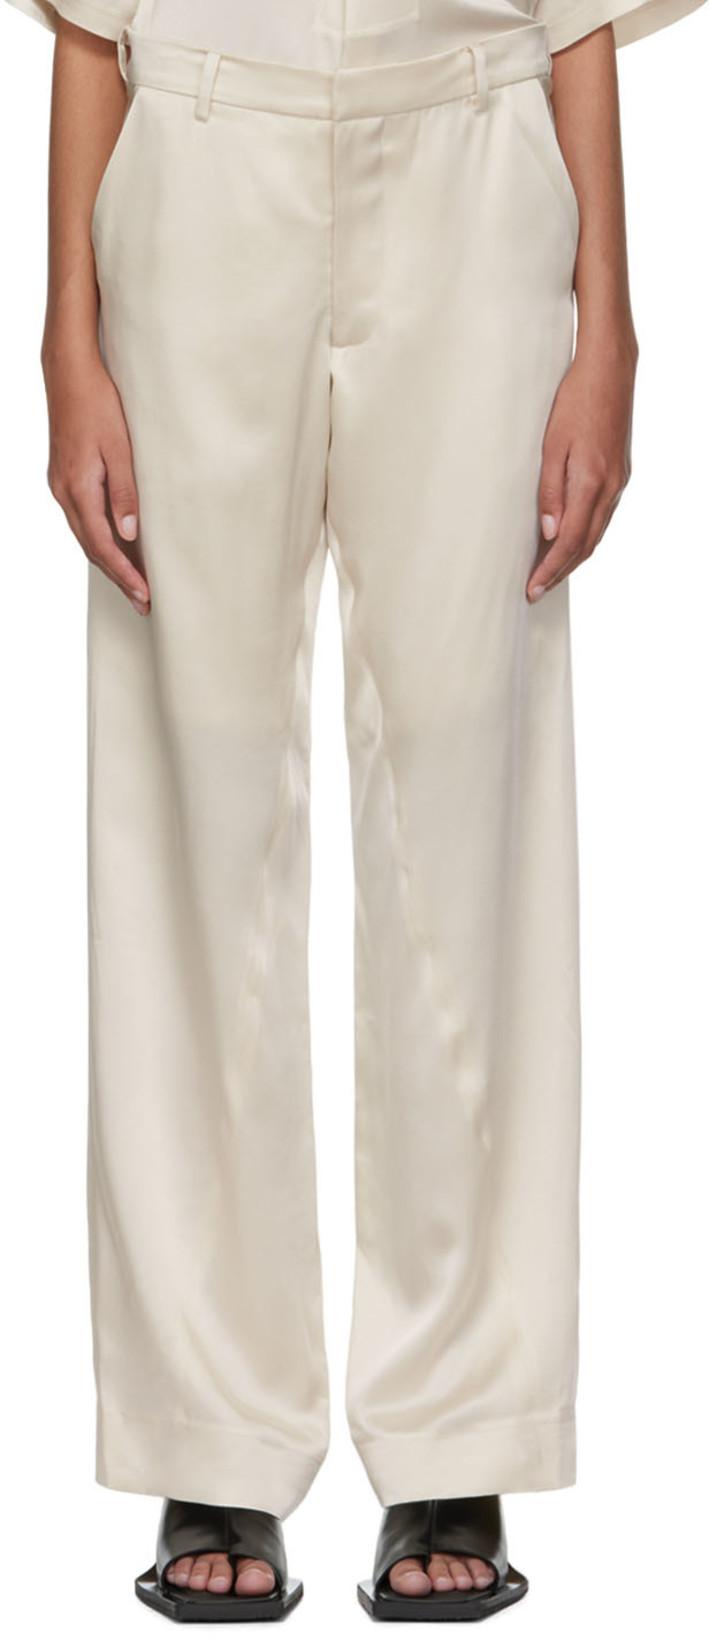 Off-White Benz Trousers by BIANCA SAUNDERS